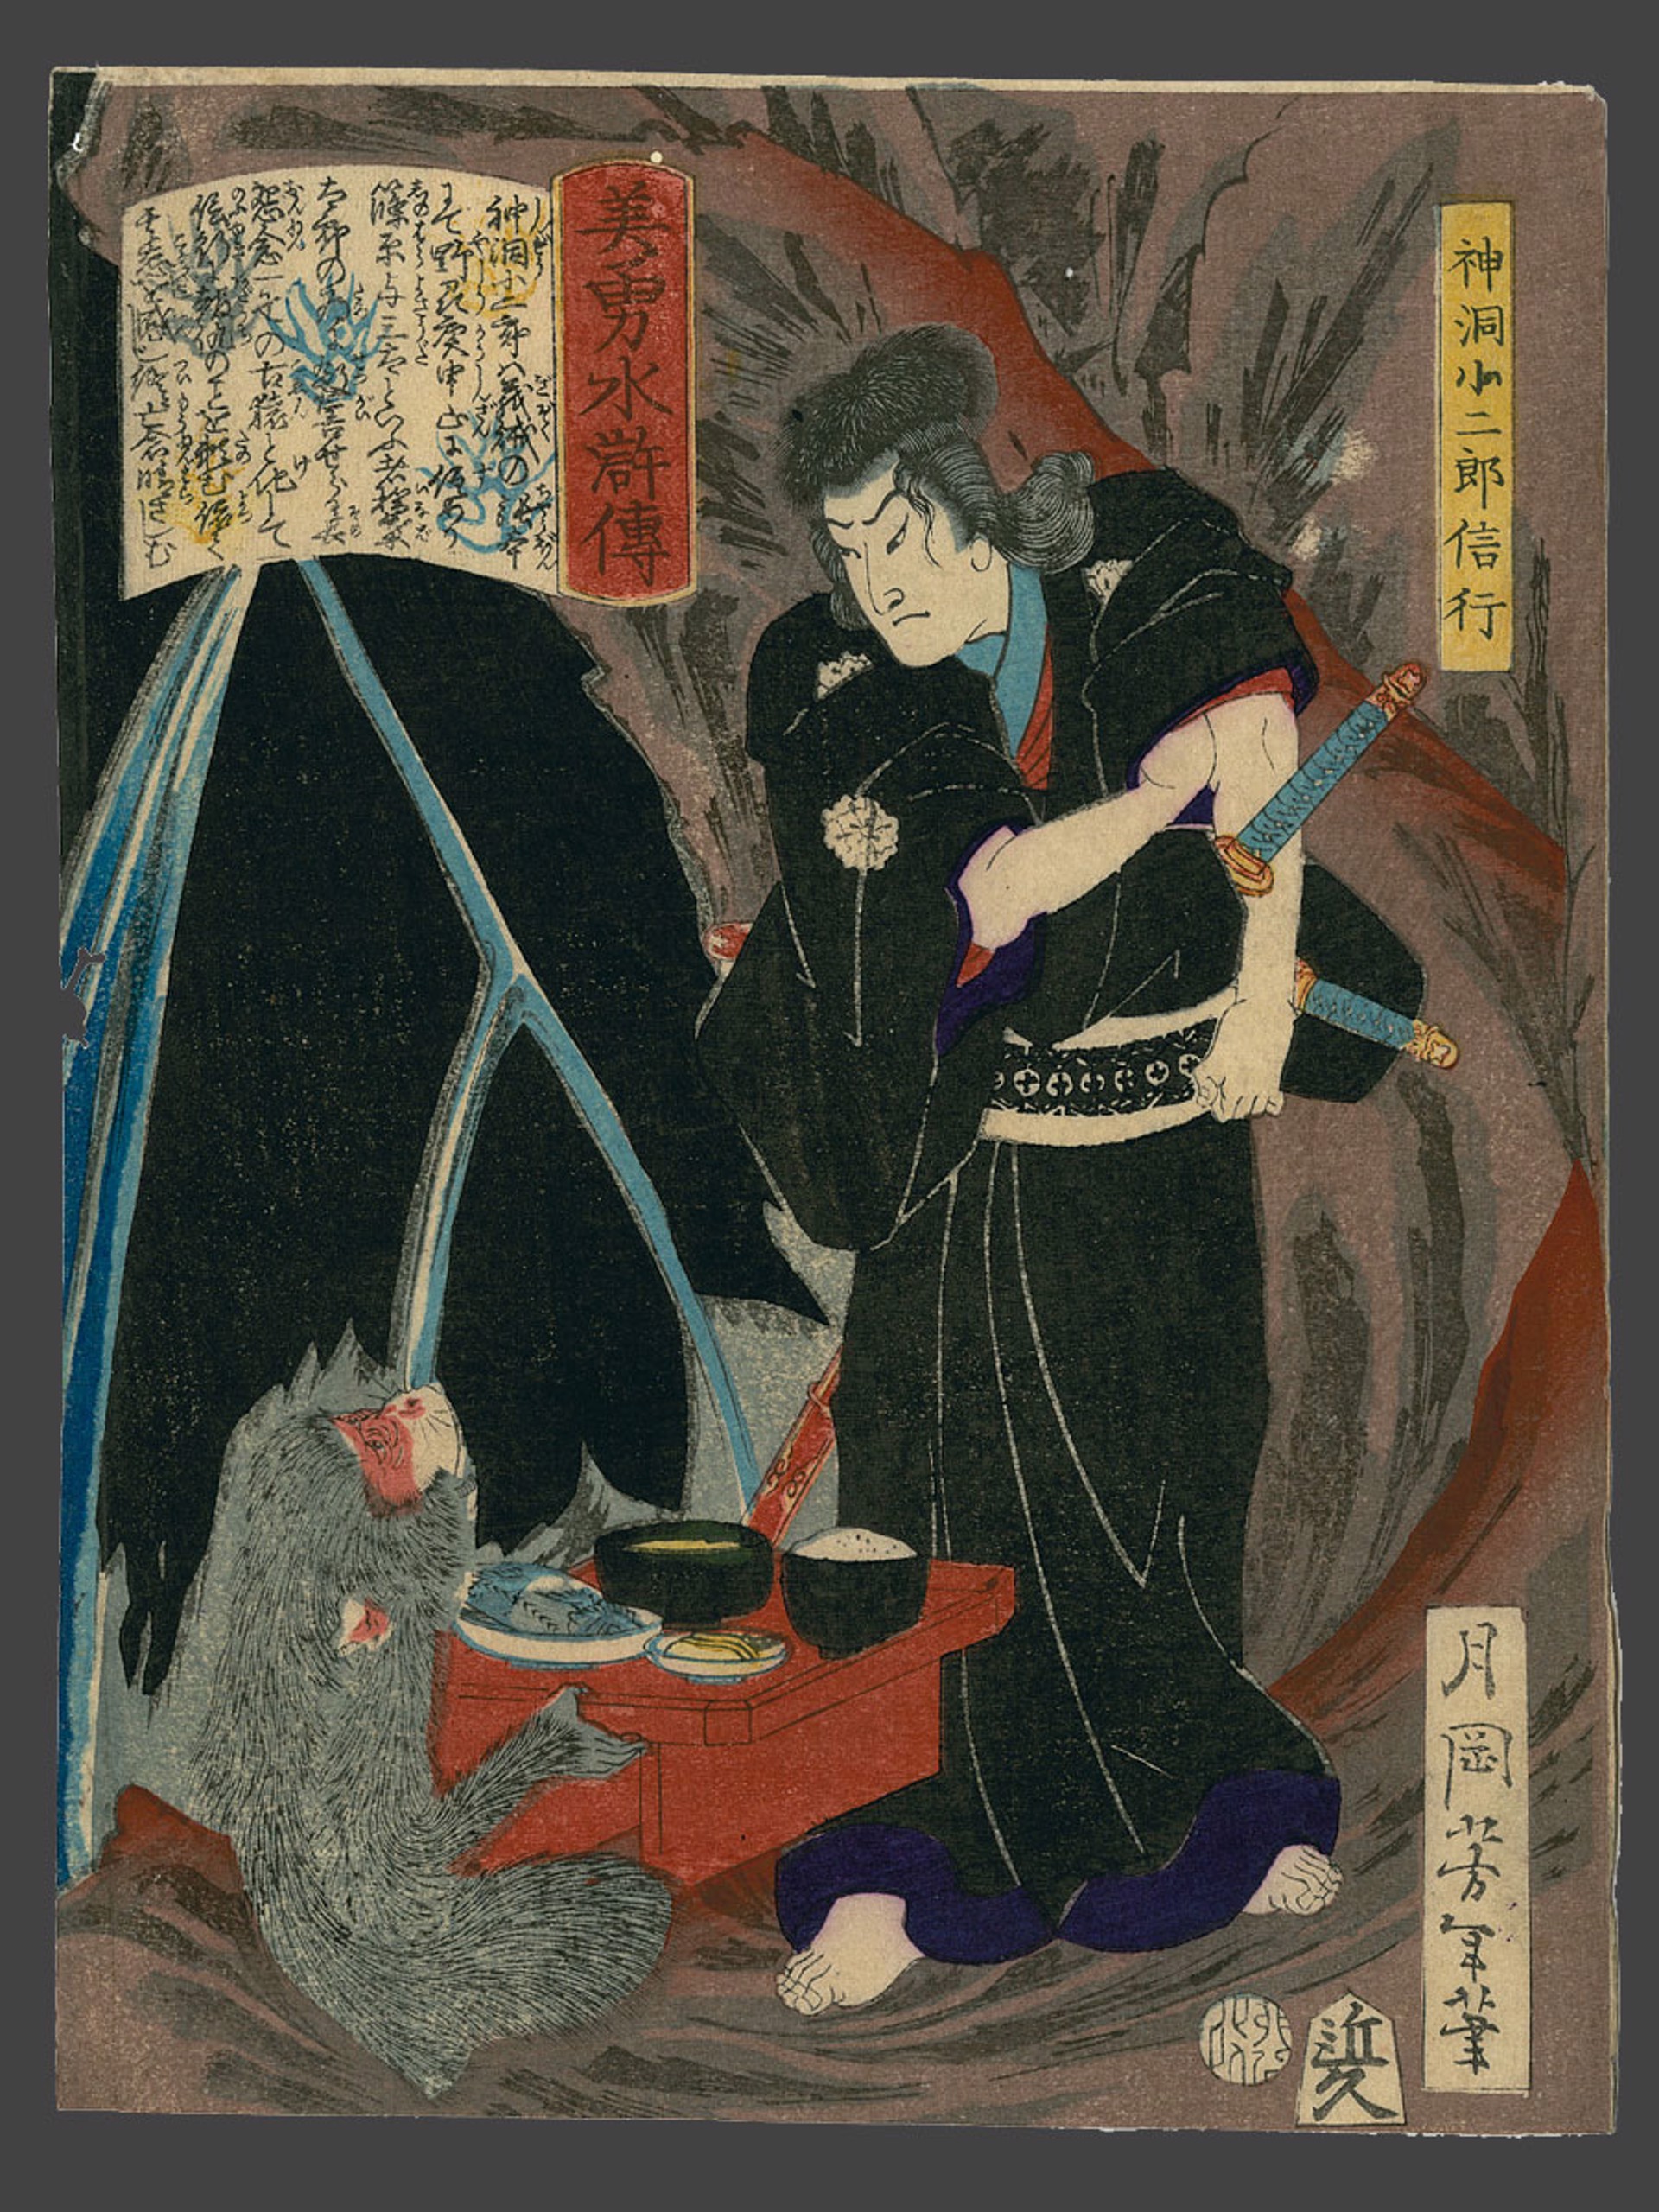 #48, Shindo Kojiro Nobuyuki in a Cave with a Monkey Biyu Suikoden (Beauty and Valor in Tales of the Water Margin) by Yoshitoshi